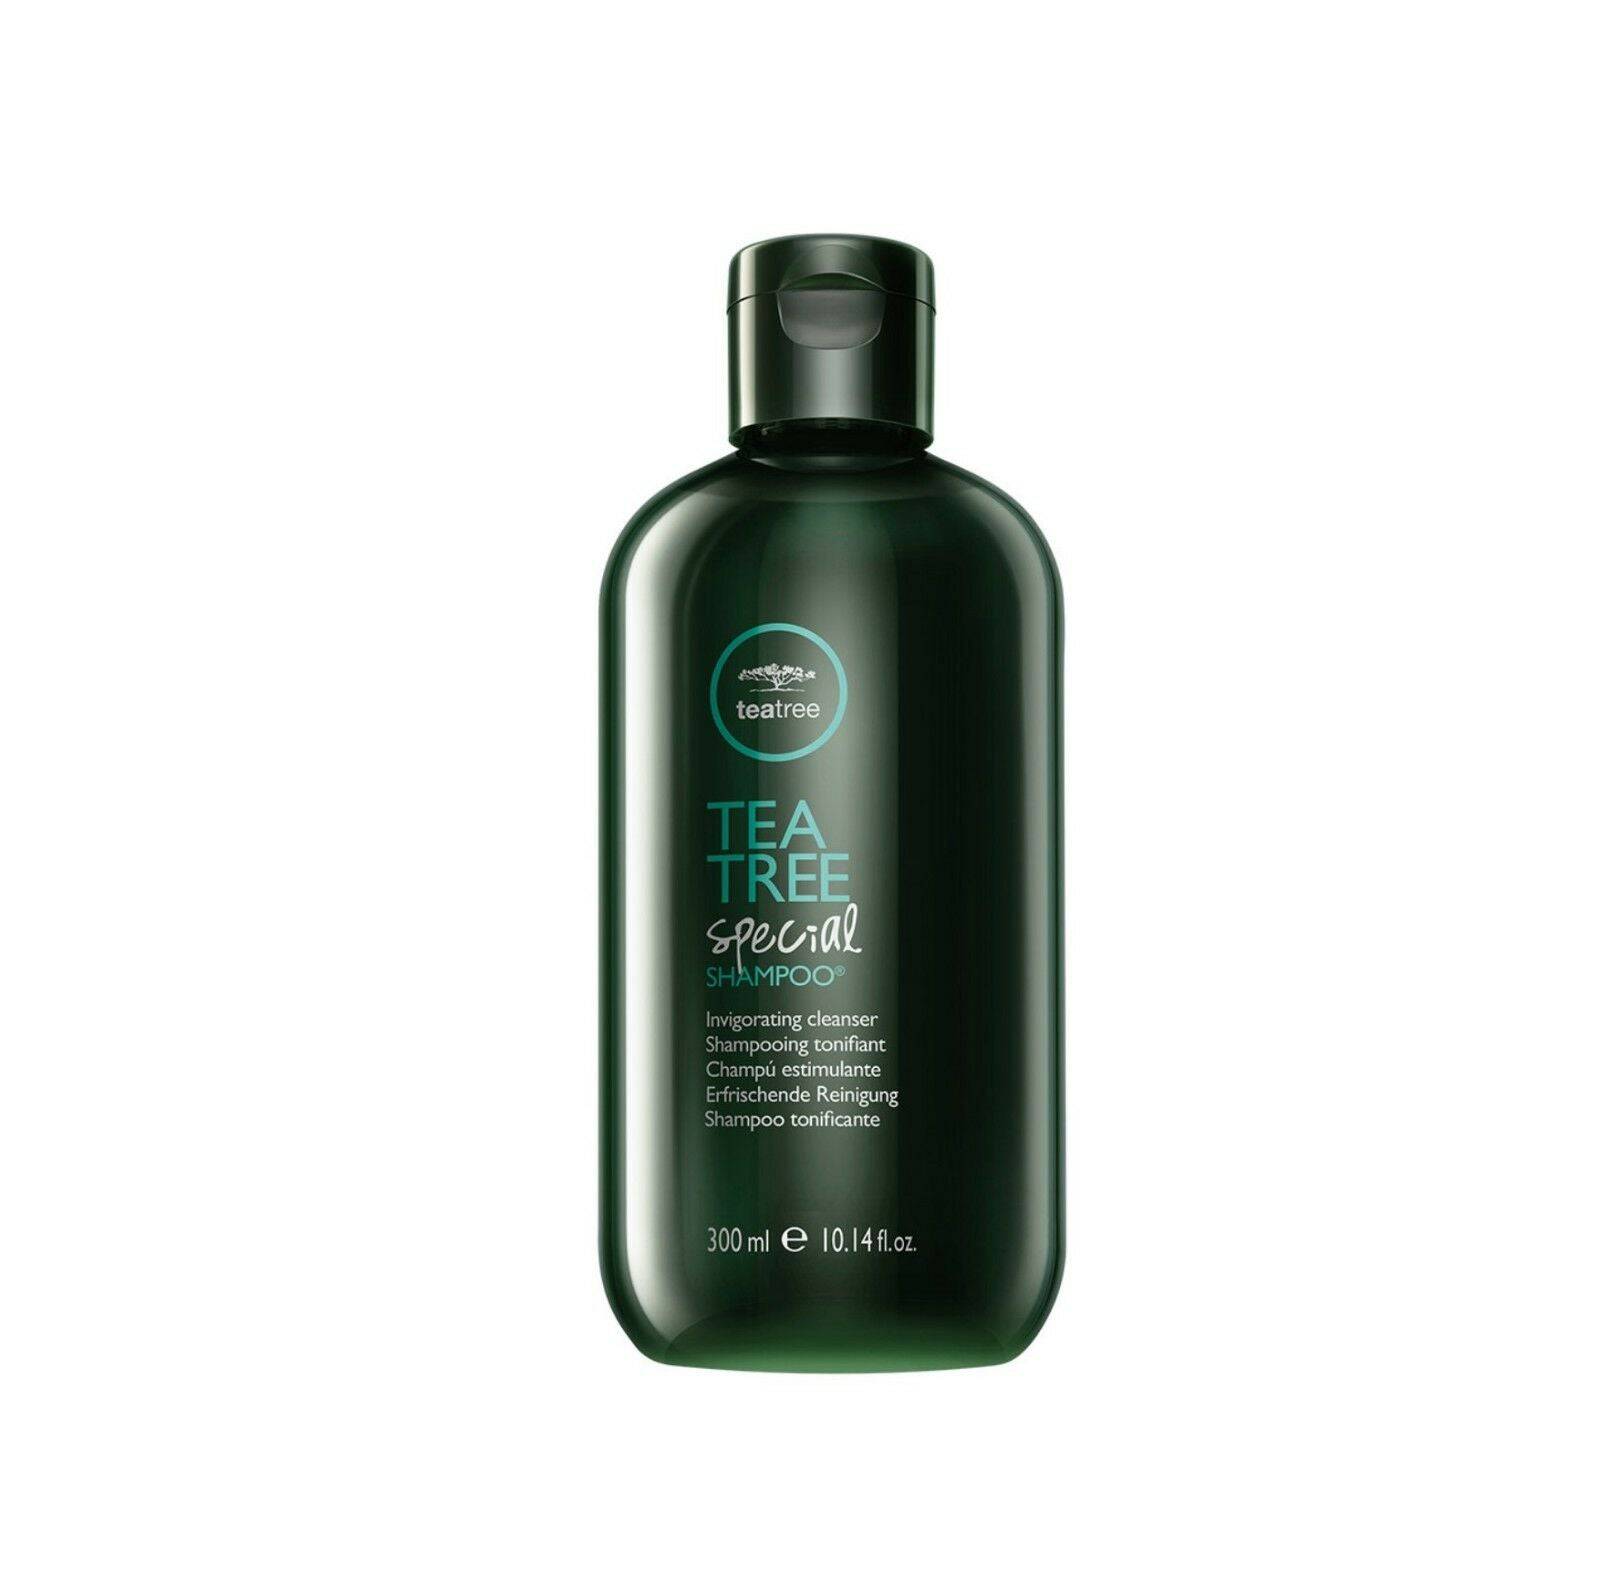 Paul Mitchell Tea Tree Special Invigorating Shampoo and Conditioner 300ml each - On Line Hair Depot